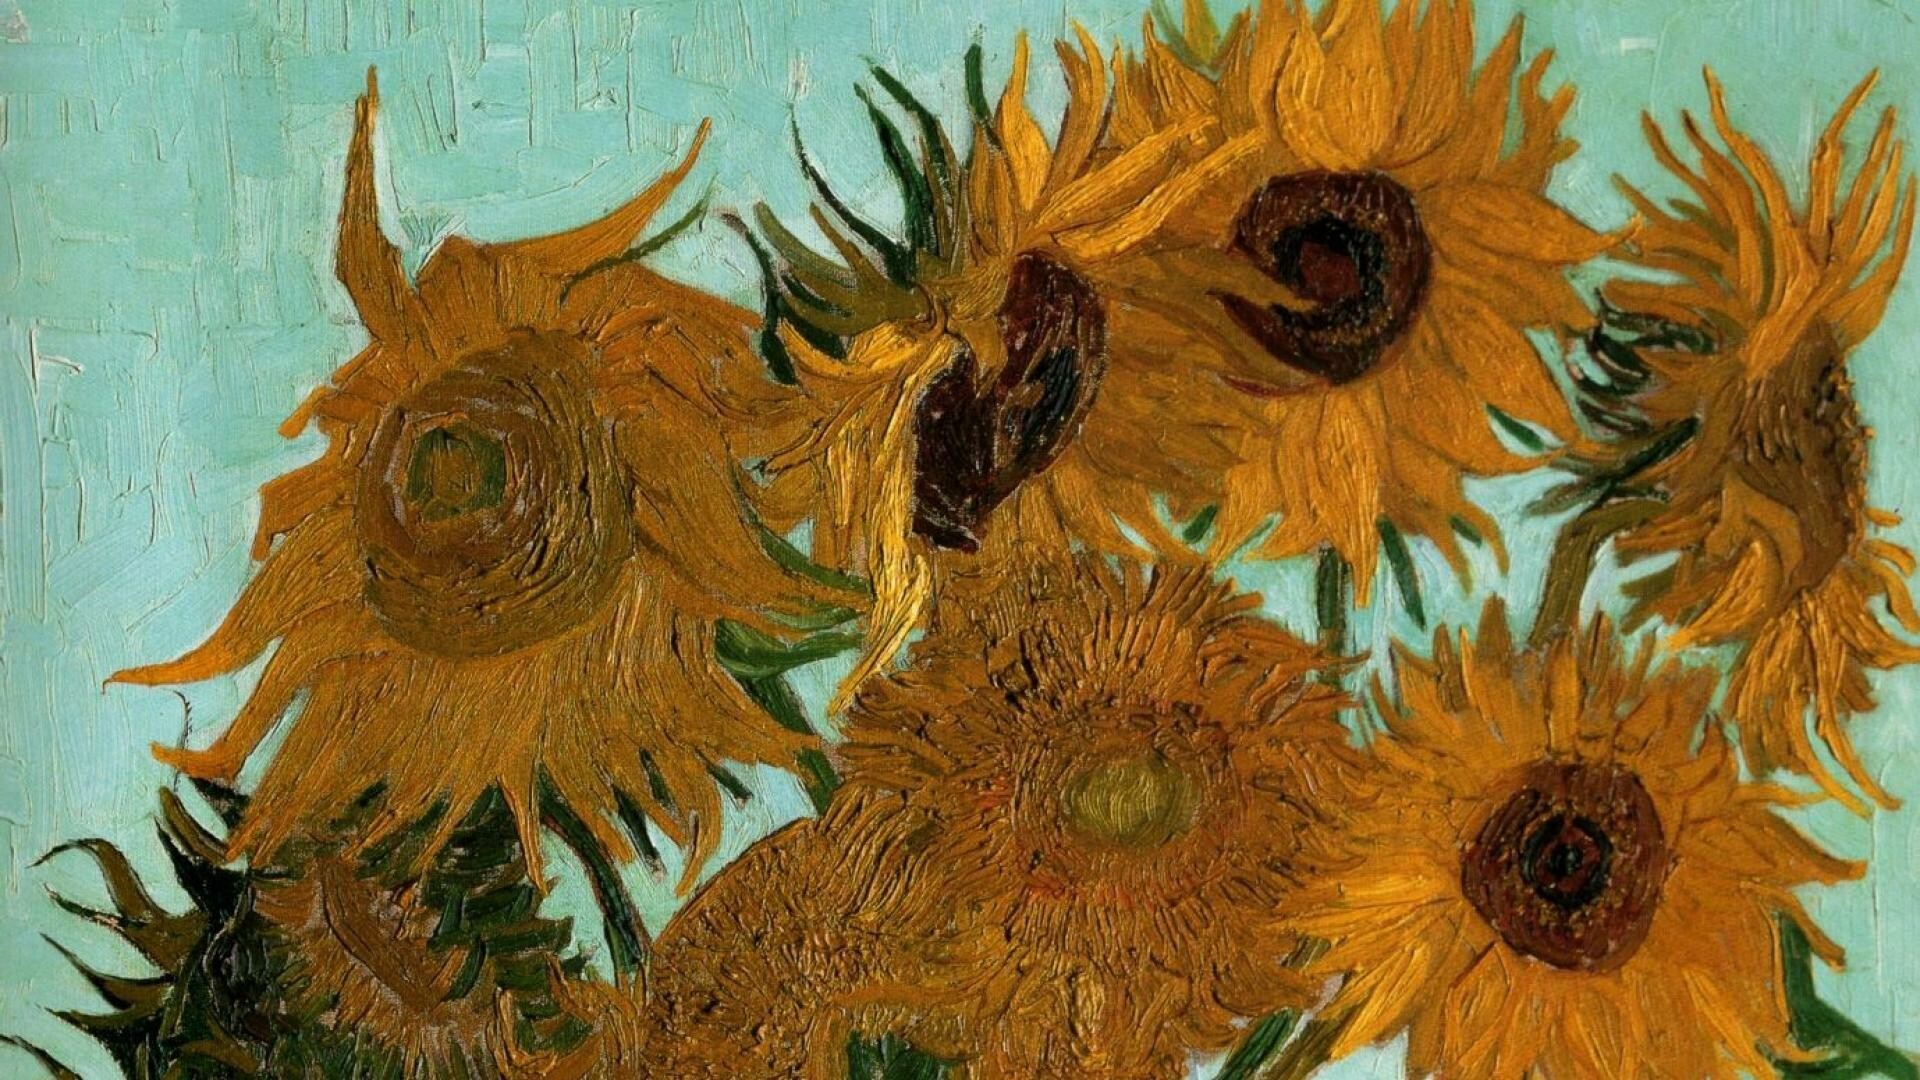 42+ Van Gogh Wallpapers: HD, 4K, 5K for PC and Mobile | Download free images  for iPhone, Android